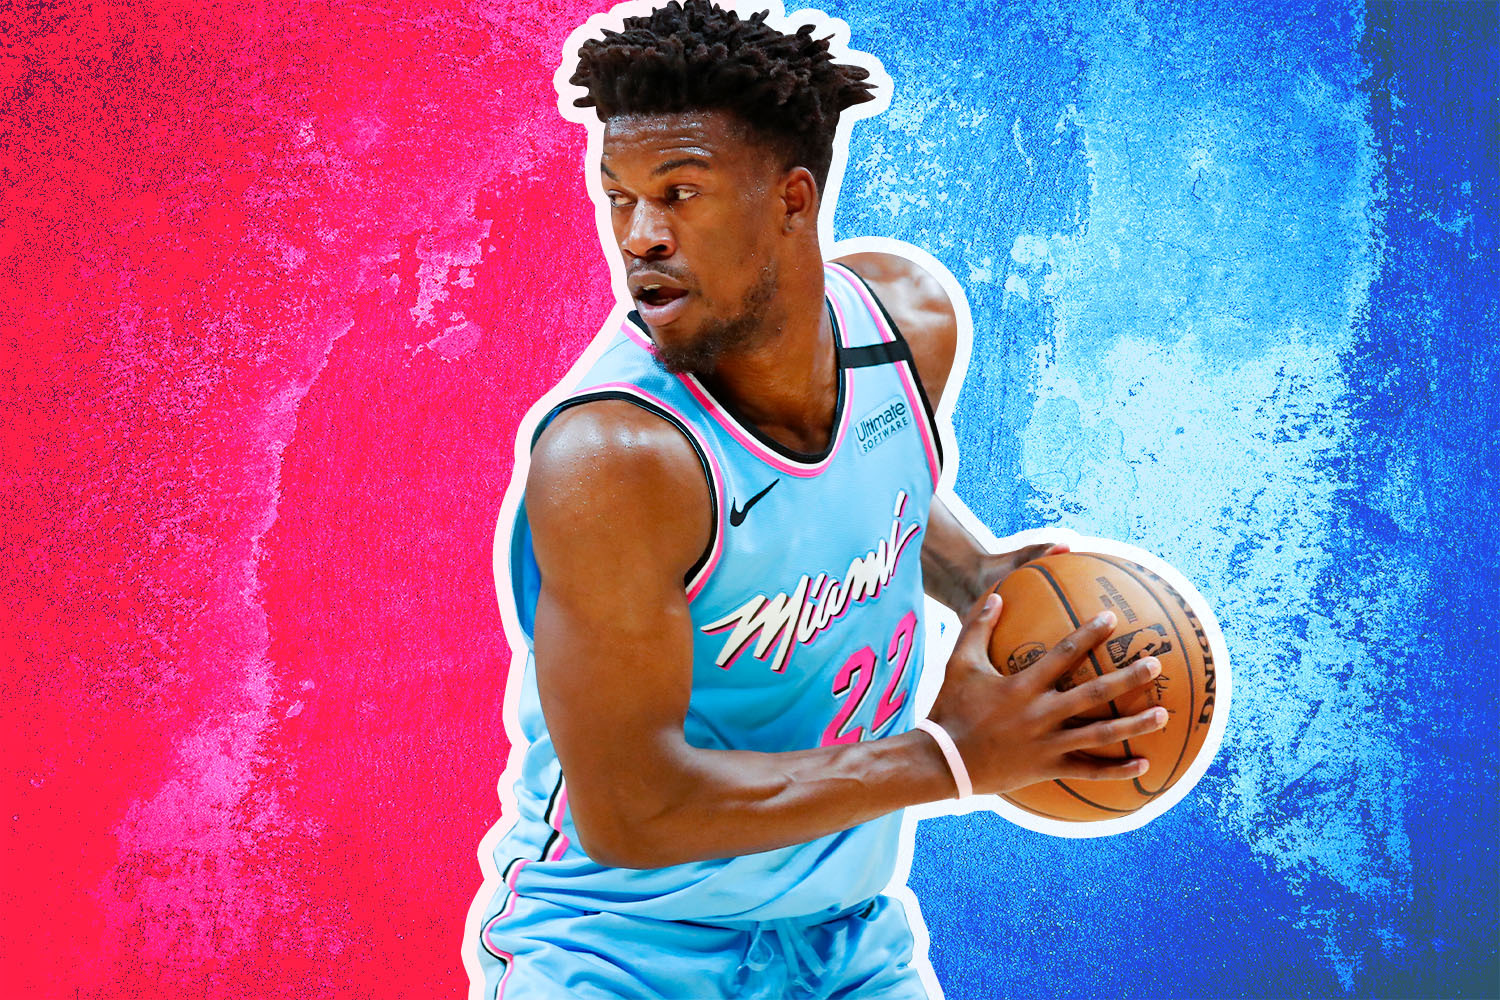 Jimmy Butler has risen from junior college player to perennial all-star